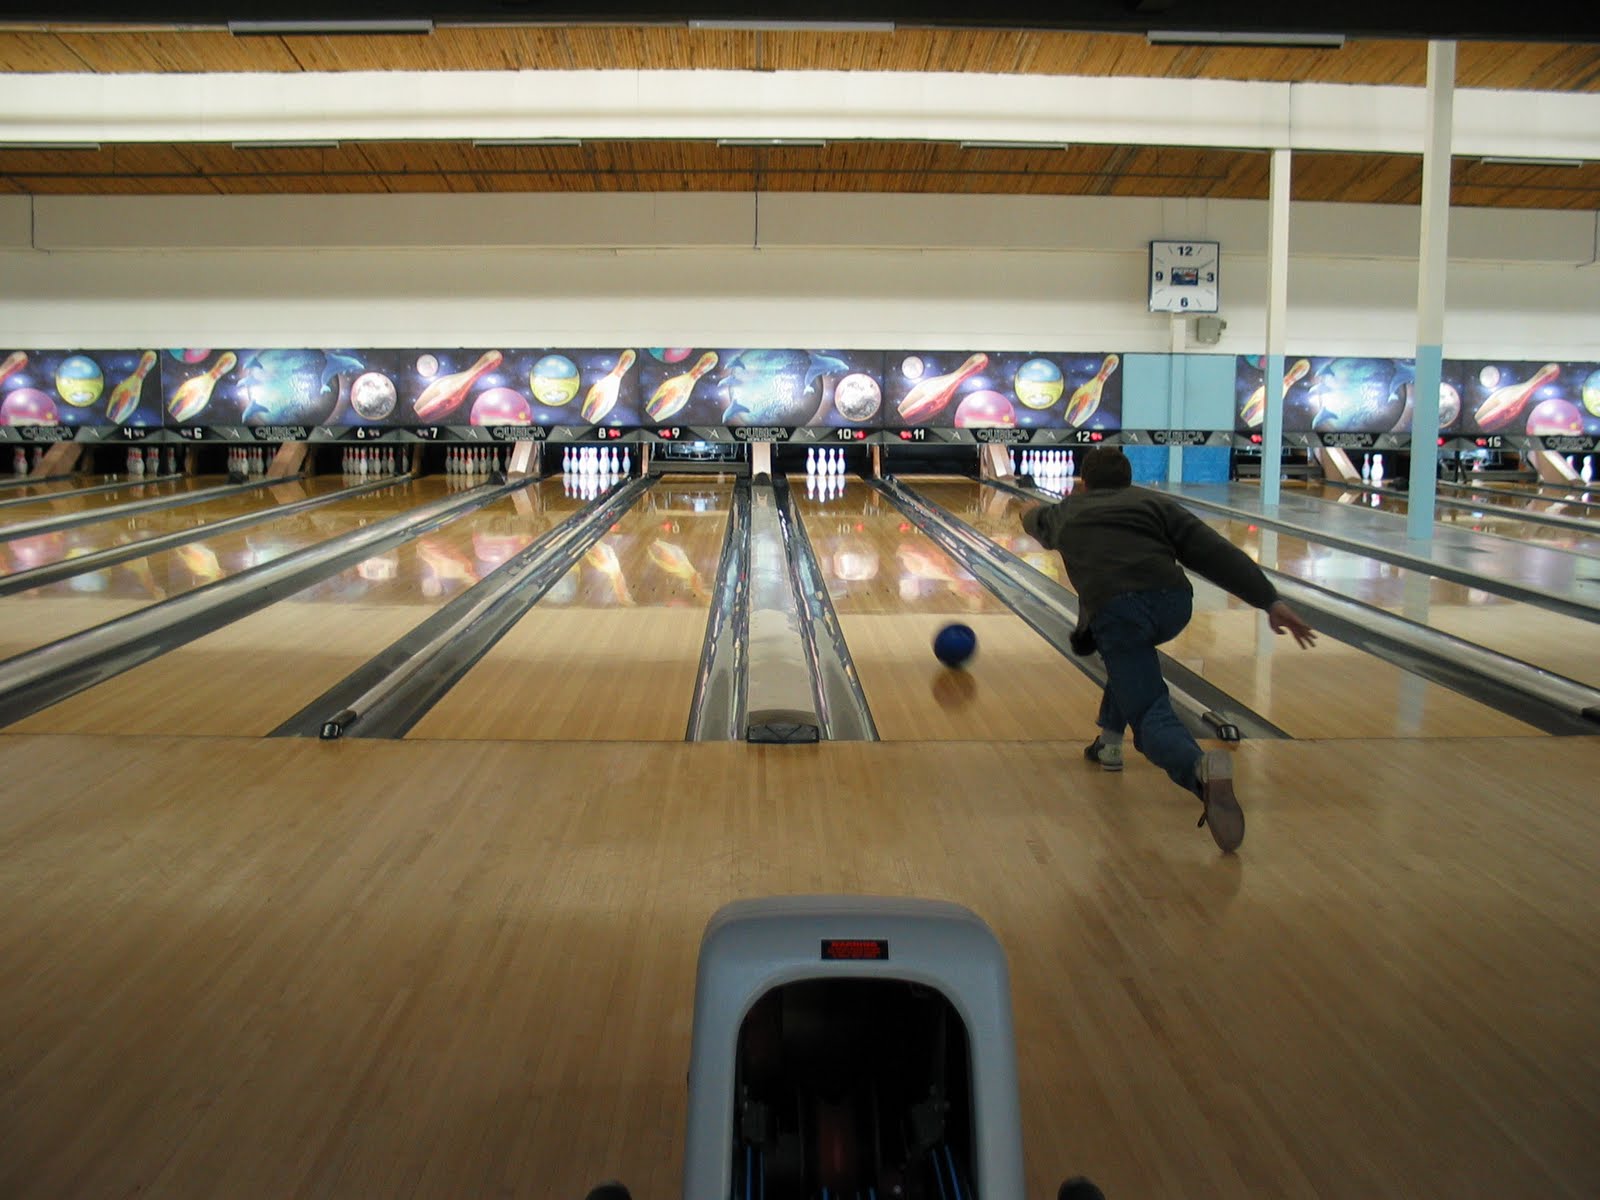 Homestead's Steve Shiver strikes out on bowling alley – Political ...